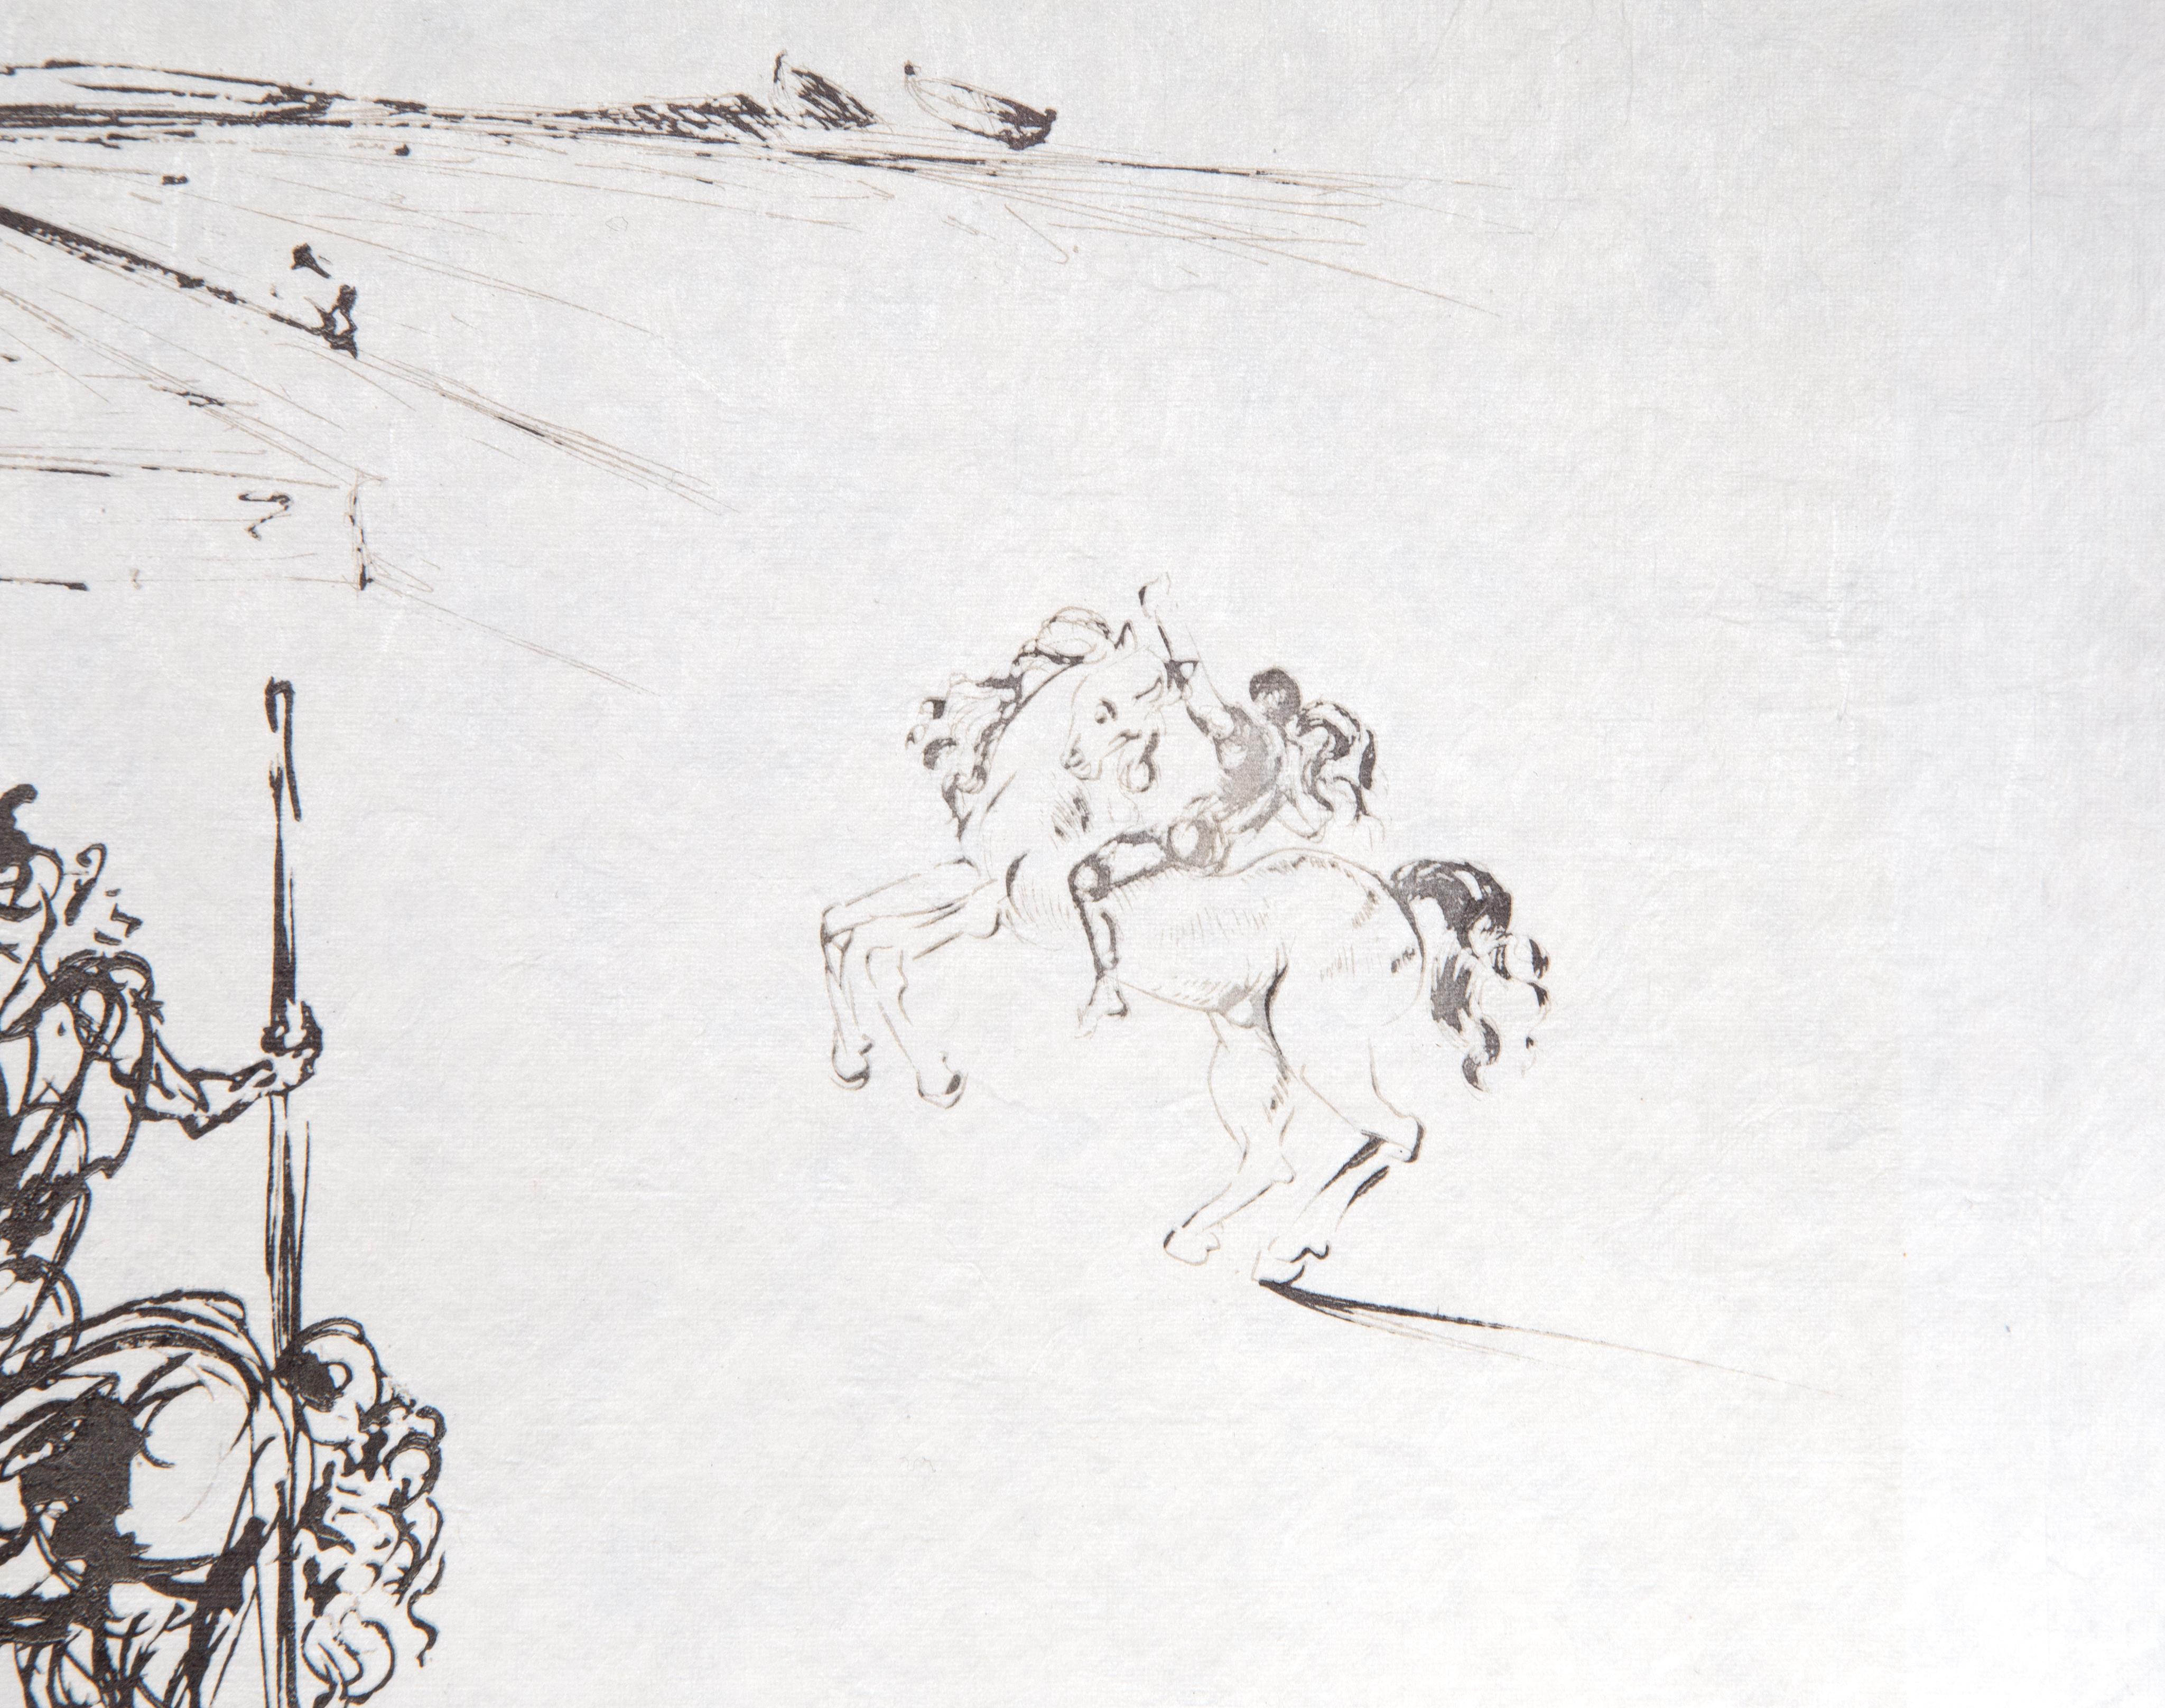 Road To Ampurdam (Rome and Cadaques), Letterpress and Engraving by Salvador Dali - Gray Landscape Print by Salvador Dalí